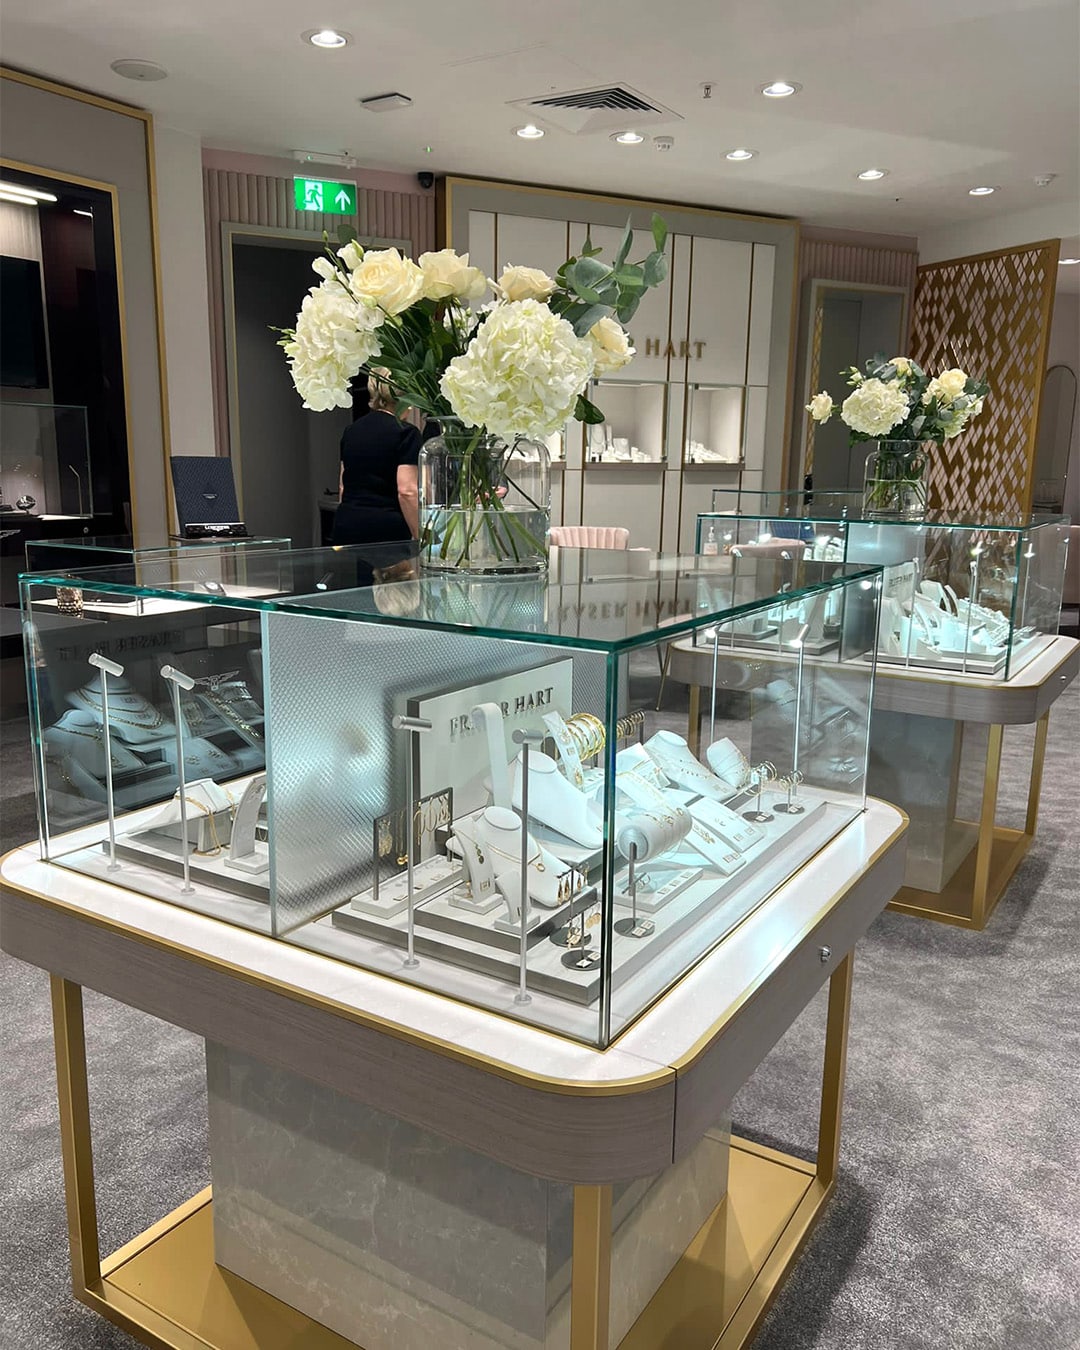 fraser hart luxury jewellry shopfitting with high quality materials